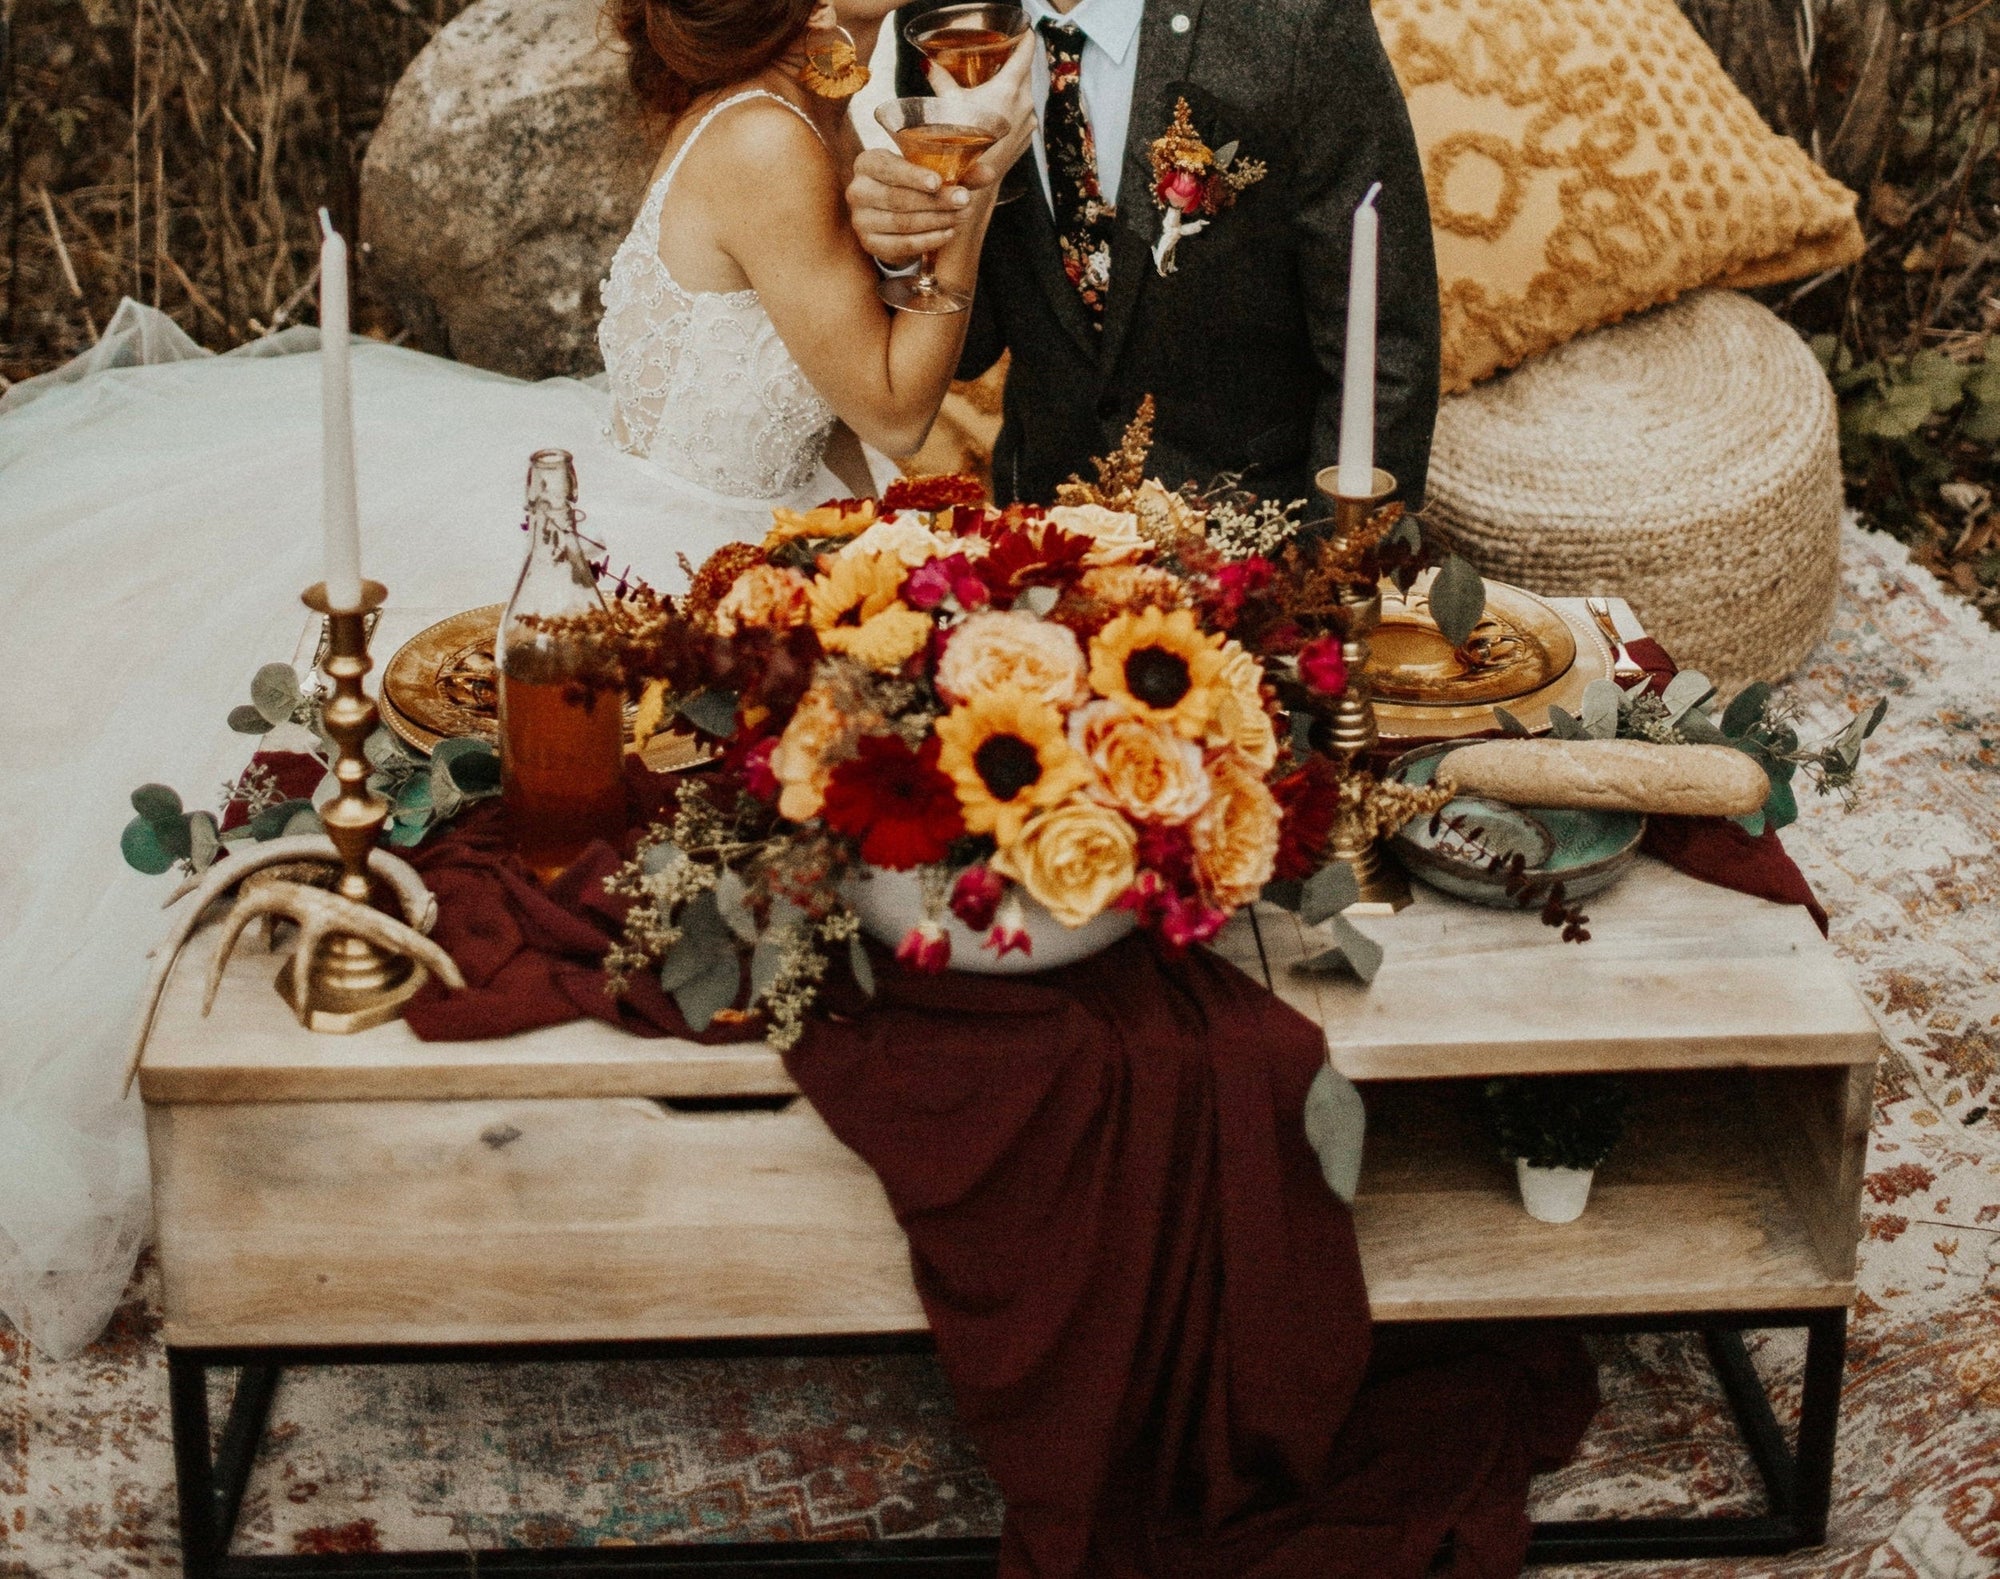 Fall Wedding Colors That Will Make Your Big Day Extra Special